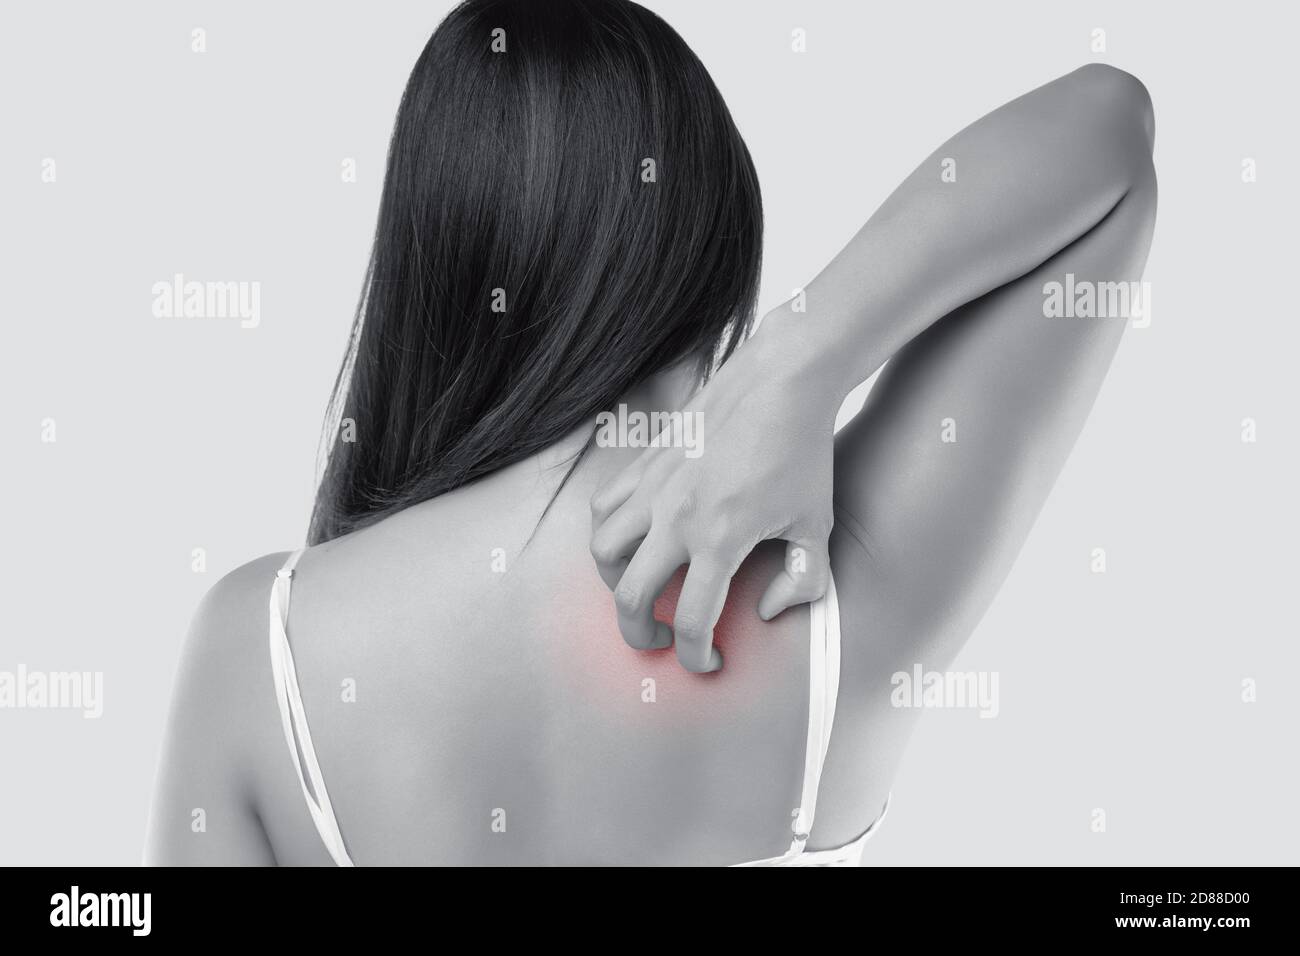 A woman scratching their back due to itching. Female with sensitive skin on a gray background. The concept of allergy symptoms and healthcare. Stock Photo